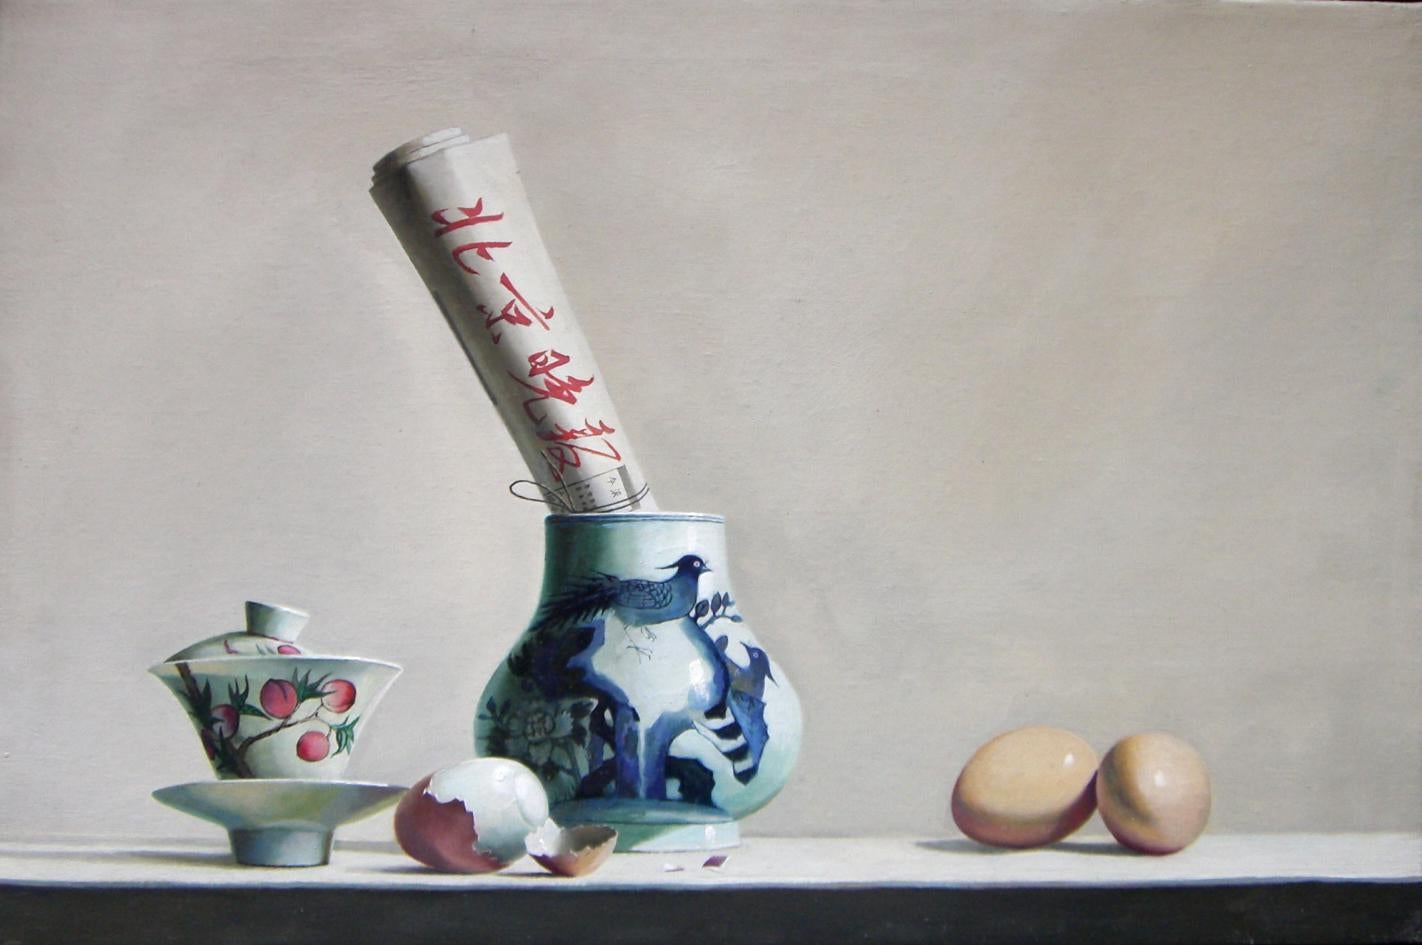 Breakfast - Oil on Canvas by Zhang Wei Guang - 2007